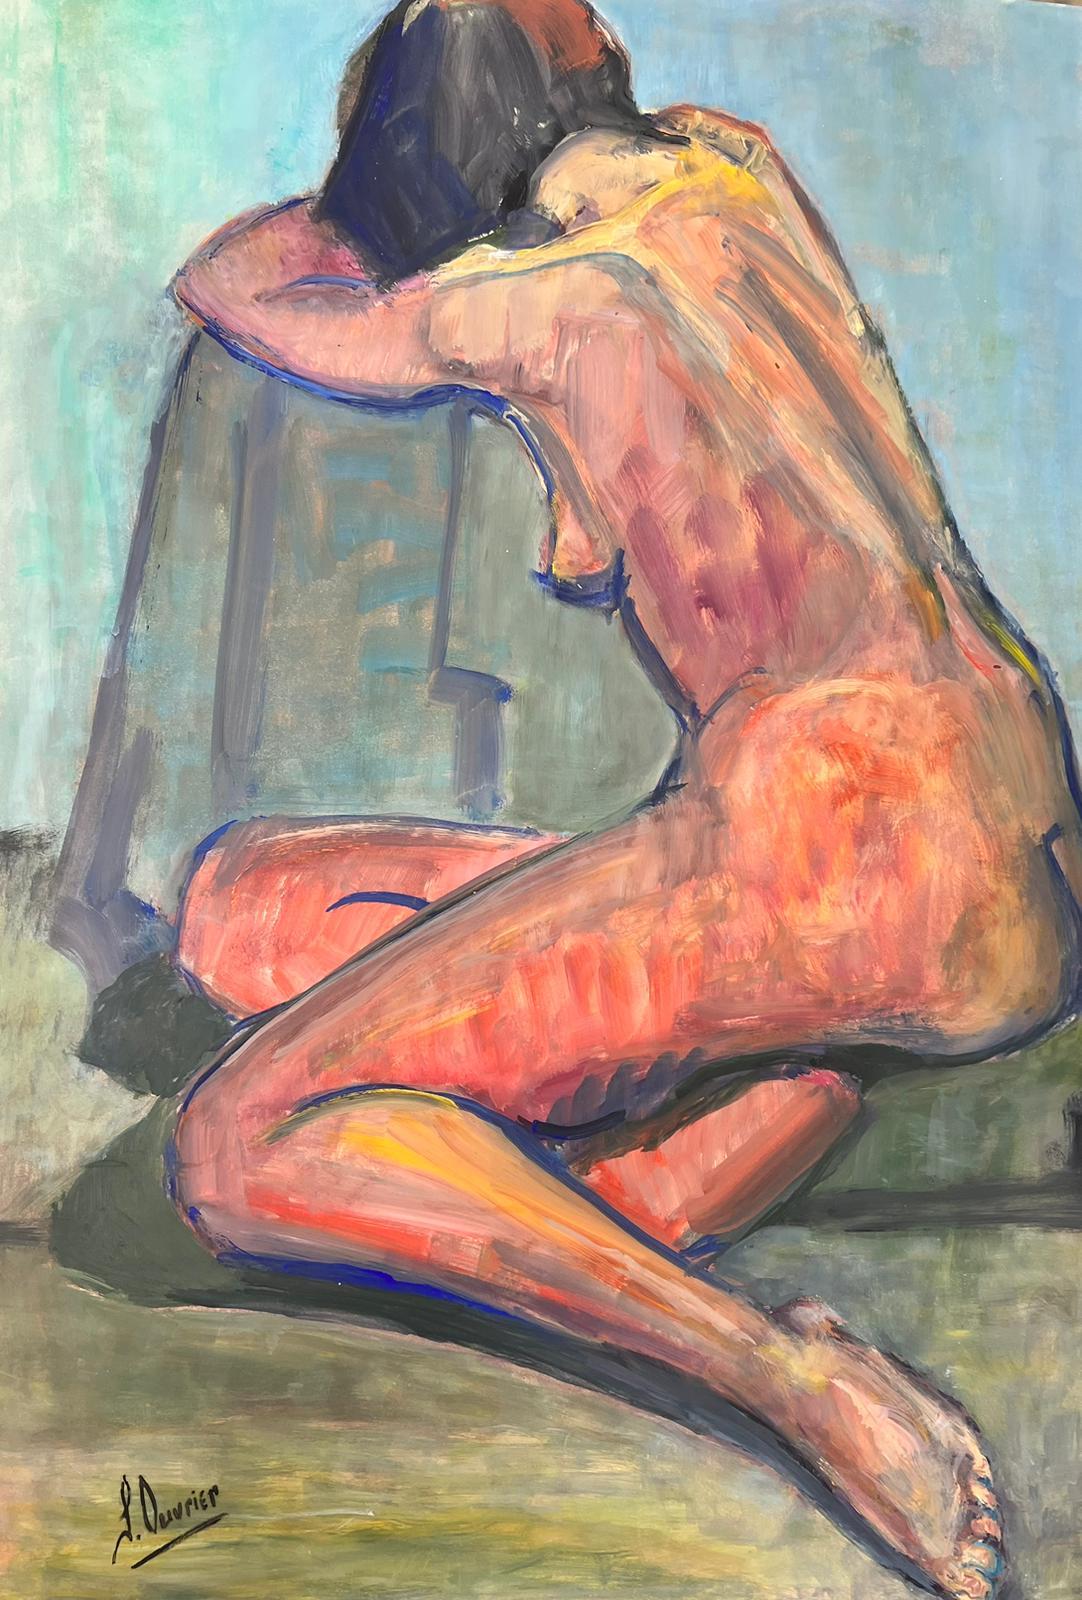 The Artists Model
Portrait of a Nude Lady reclining
French School, circa 1970's
indistinctly signed 
oil painting on card, unframed
size: 25 x 18 inches
condition: overall very good, a very few light markings to the surface but nothing detrimental